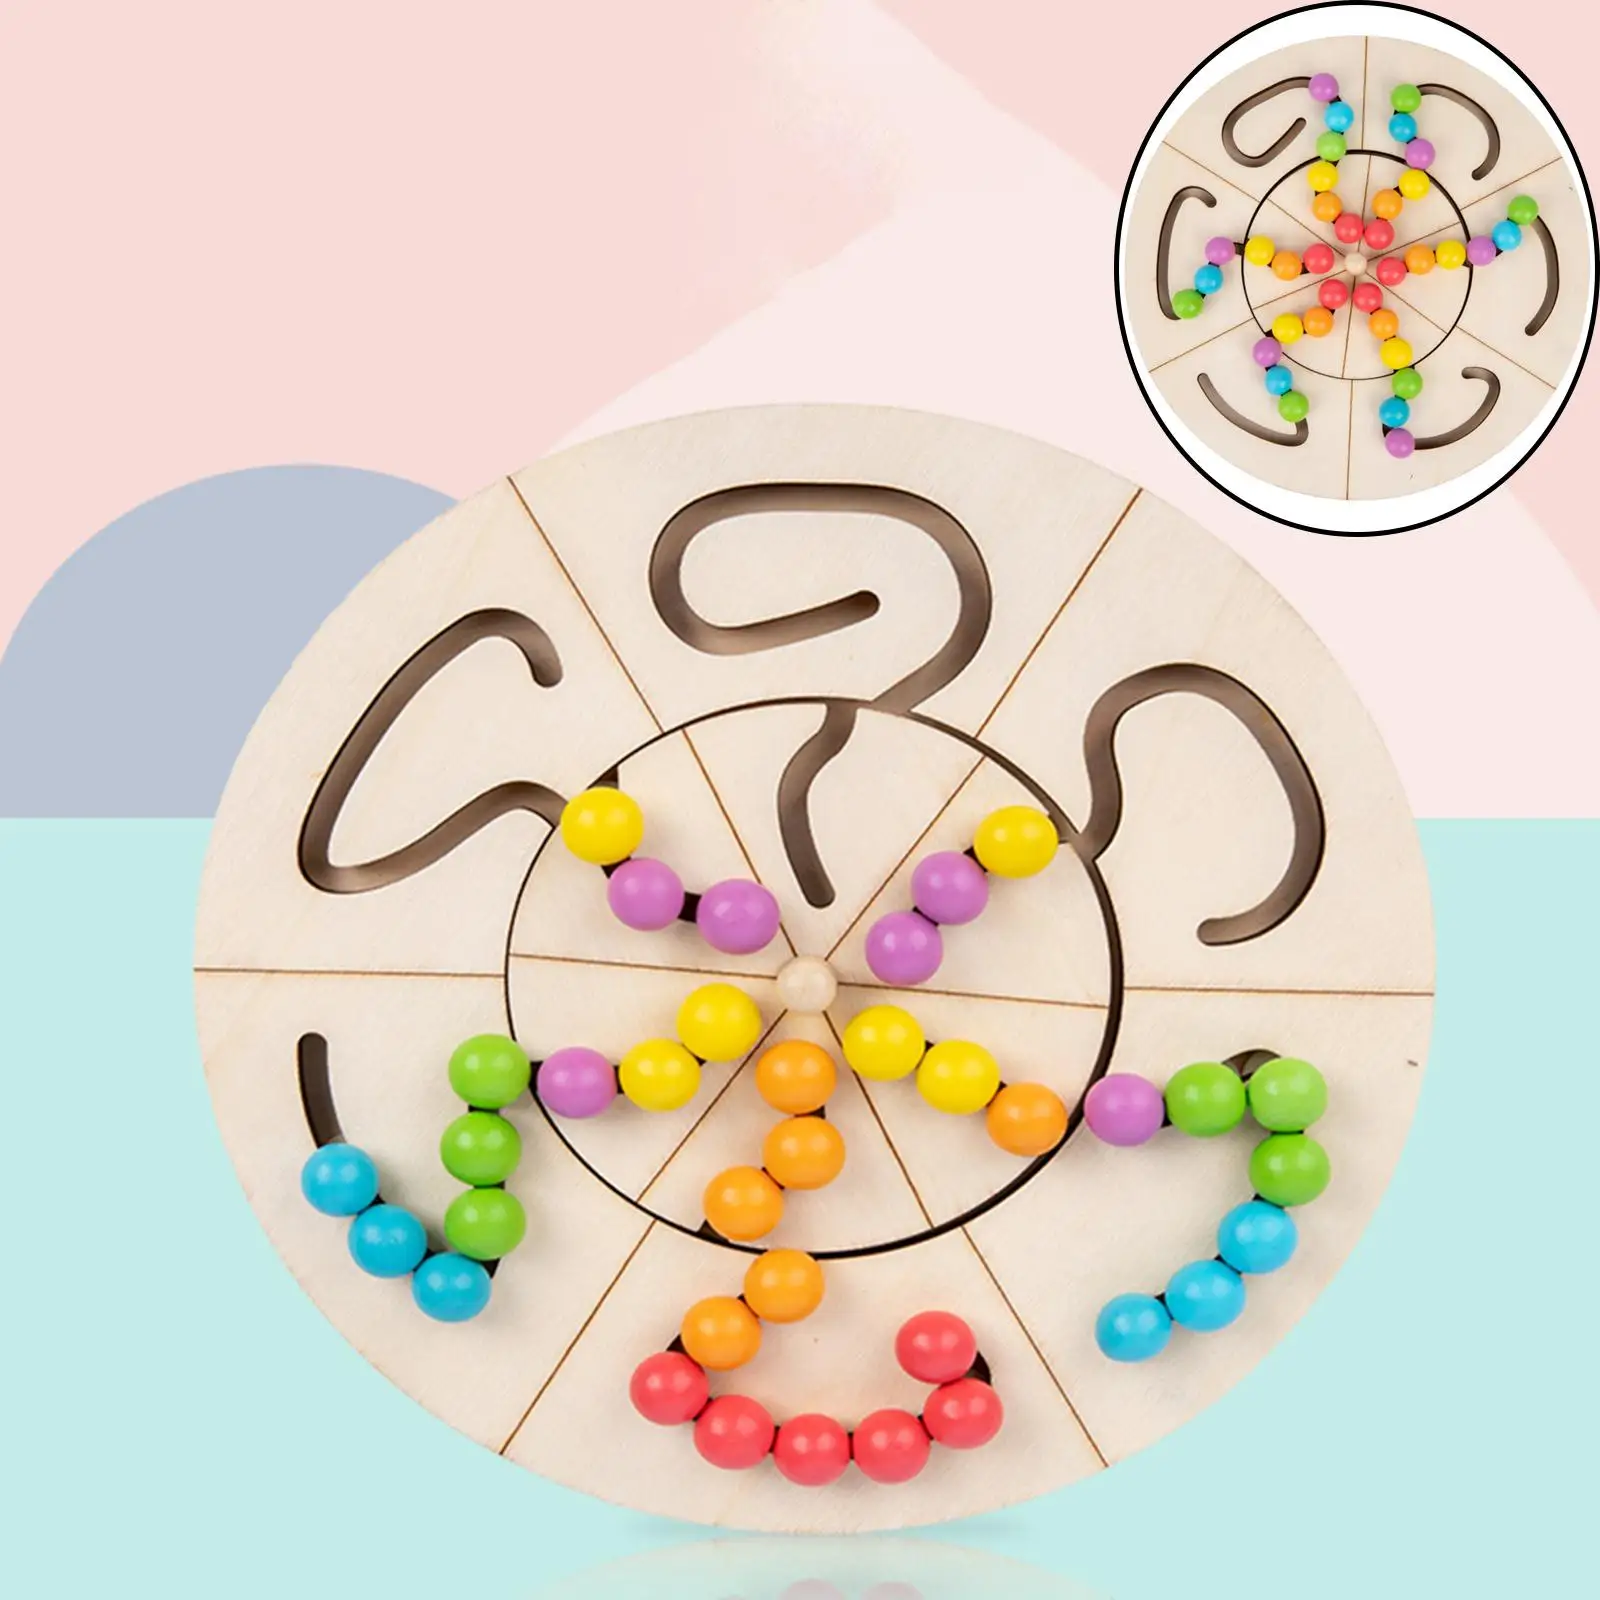 Montessori Wooden Bead Maze Puzzle Toys Activity Puzzle Brain Teaser Toddlers Educational Shape Sorting Gift